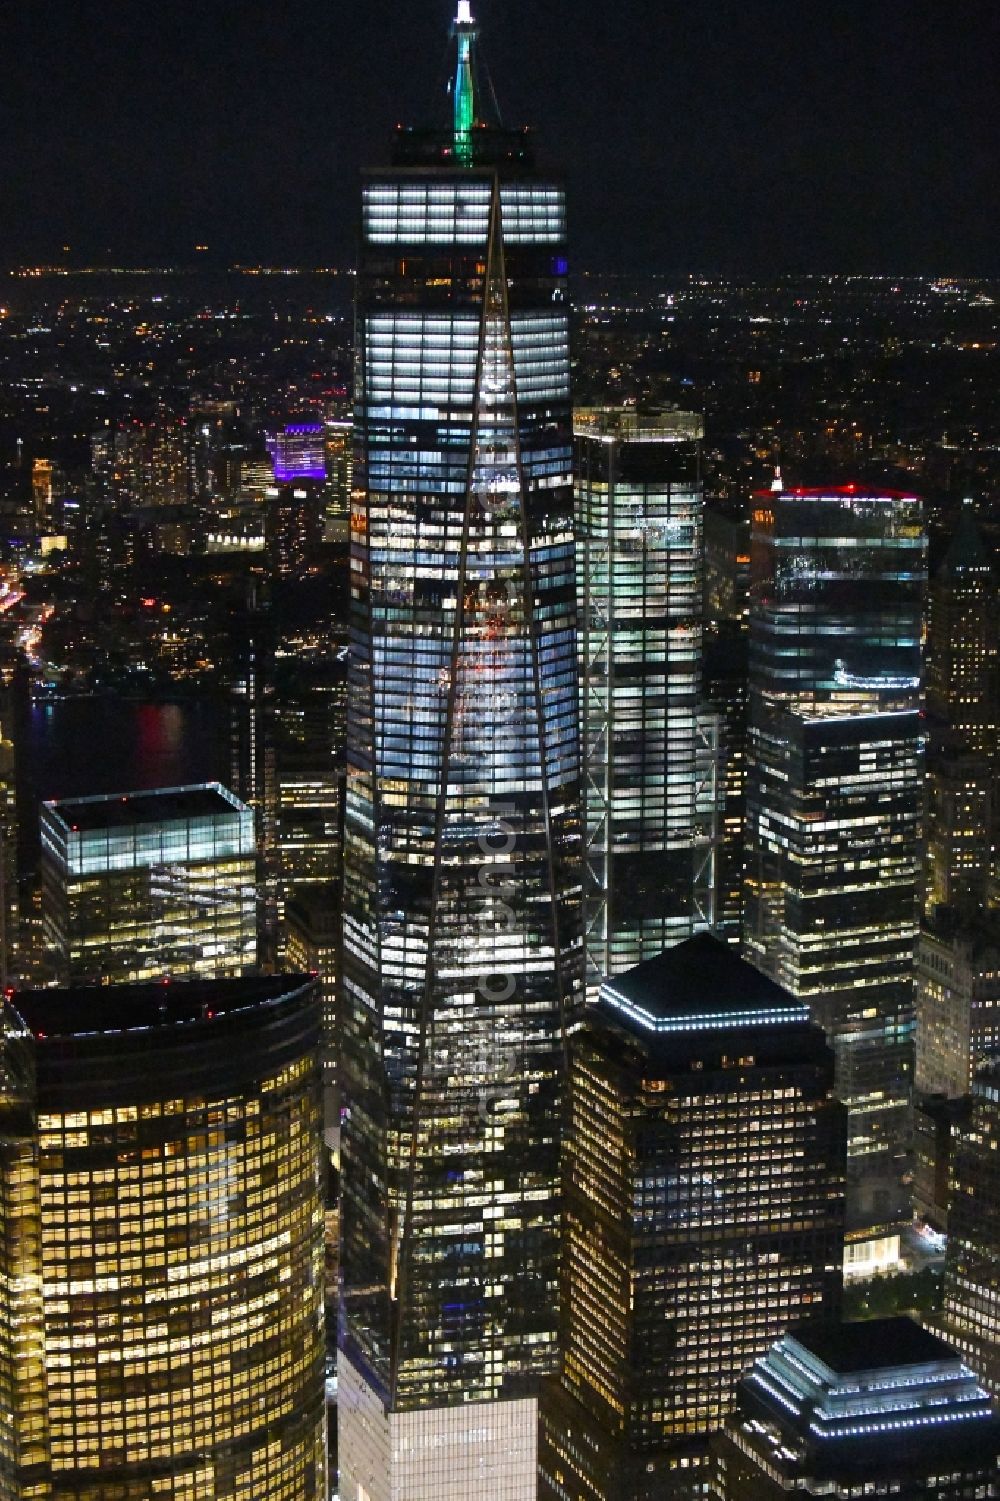 New York at night from above - Night lighting High-rise buildings One World Trade Center in the district Manhattan in New York in United States of America